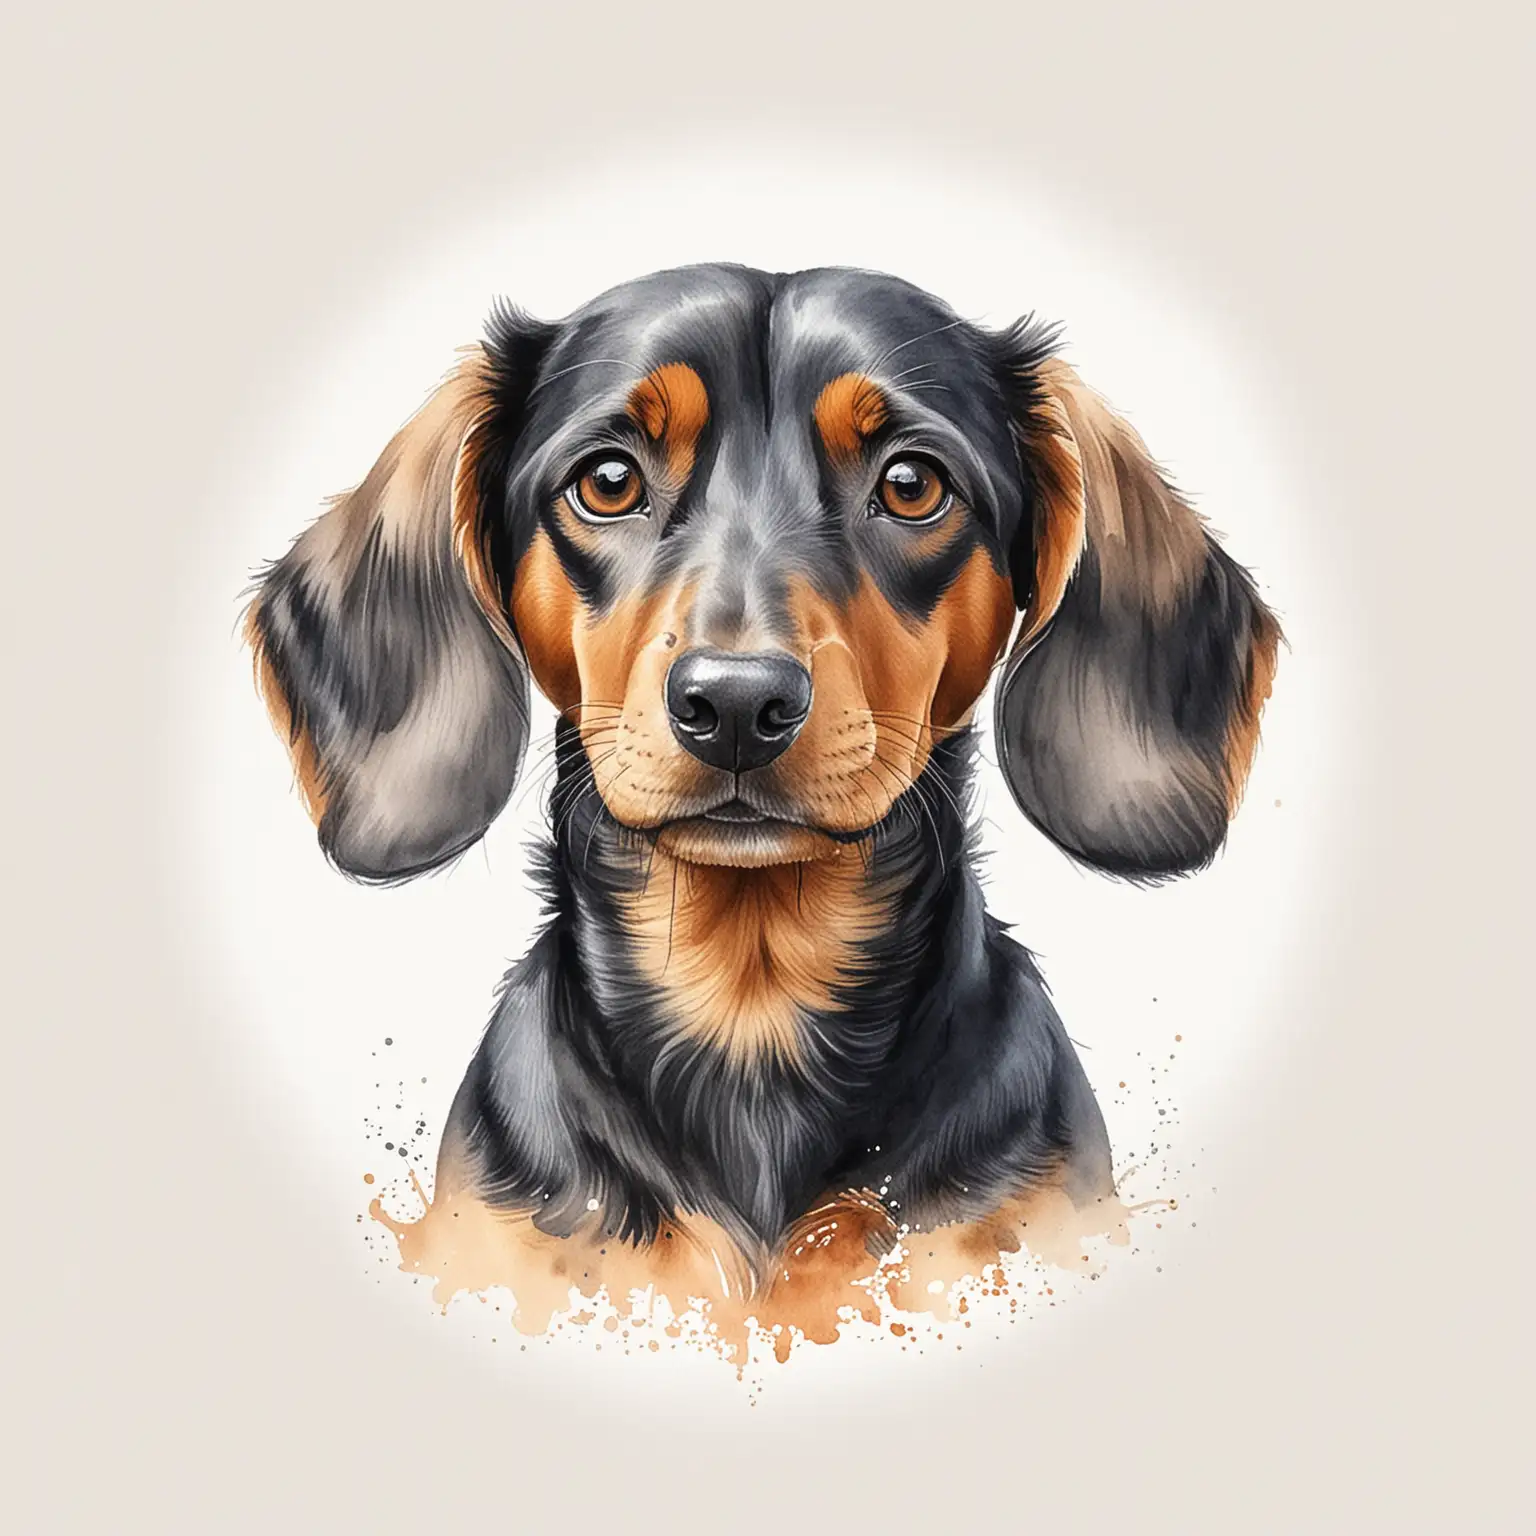 Cute Daschund dog, water colour drawing, isolated on a white background